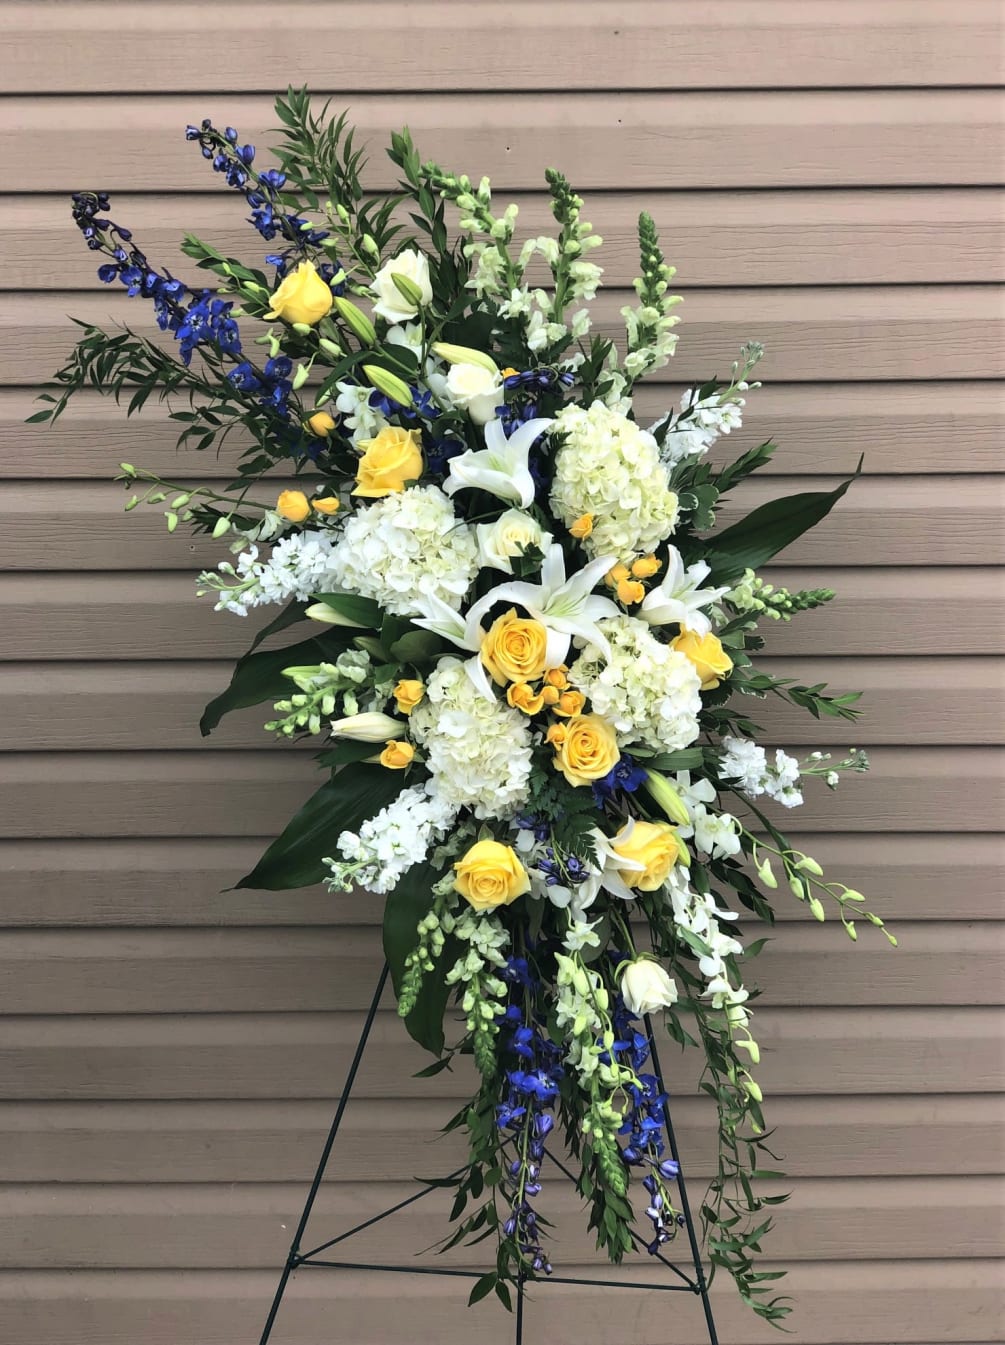 Gorgeous and unique styledspray of yellow blue and white flowers such as